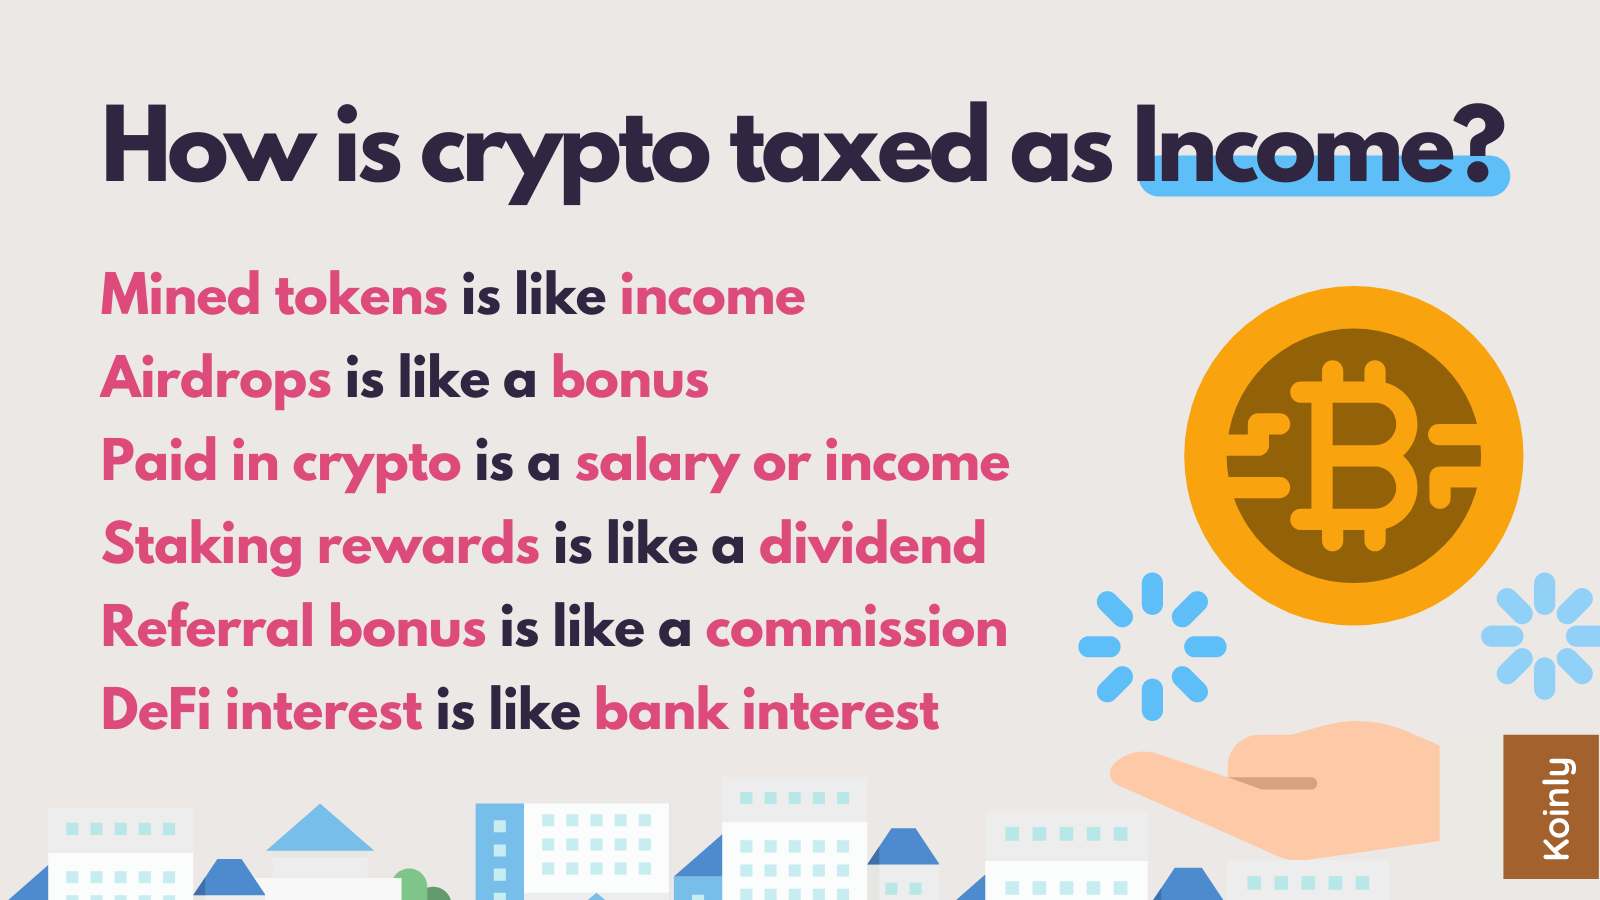 Cryptocurrency gains can be treated as income tax